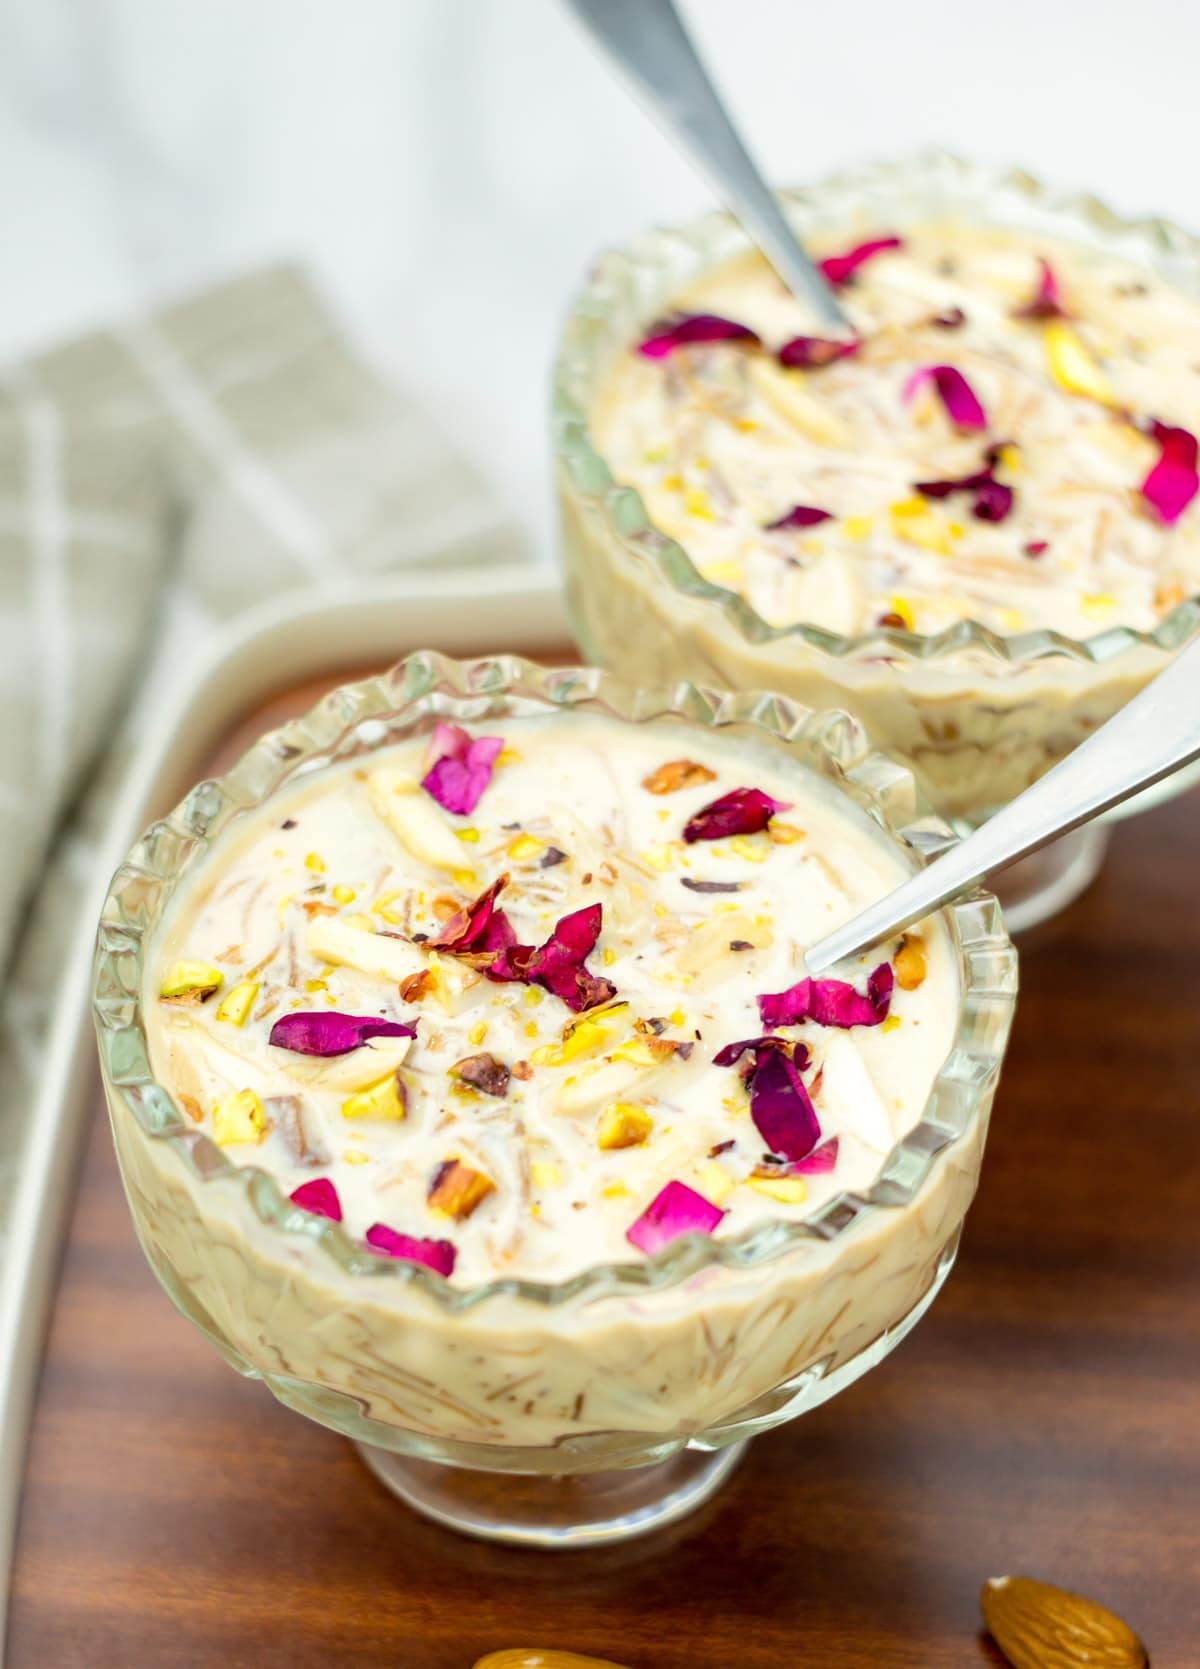 Sheer Khurma garnished with nuts